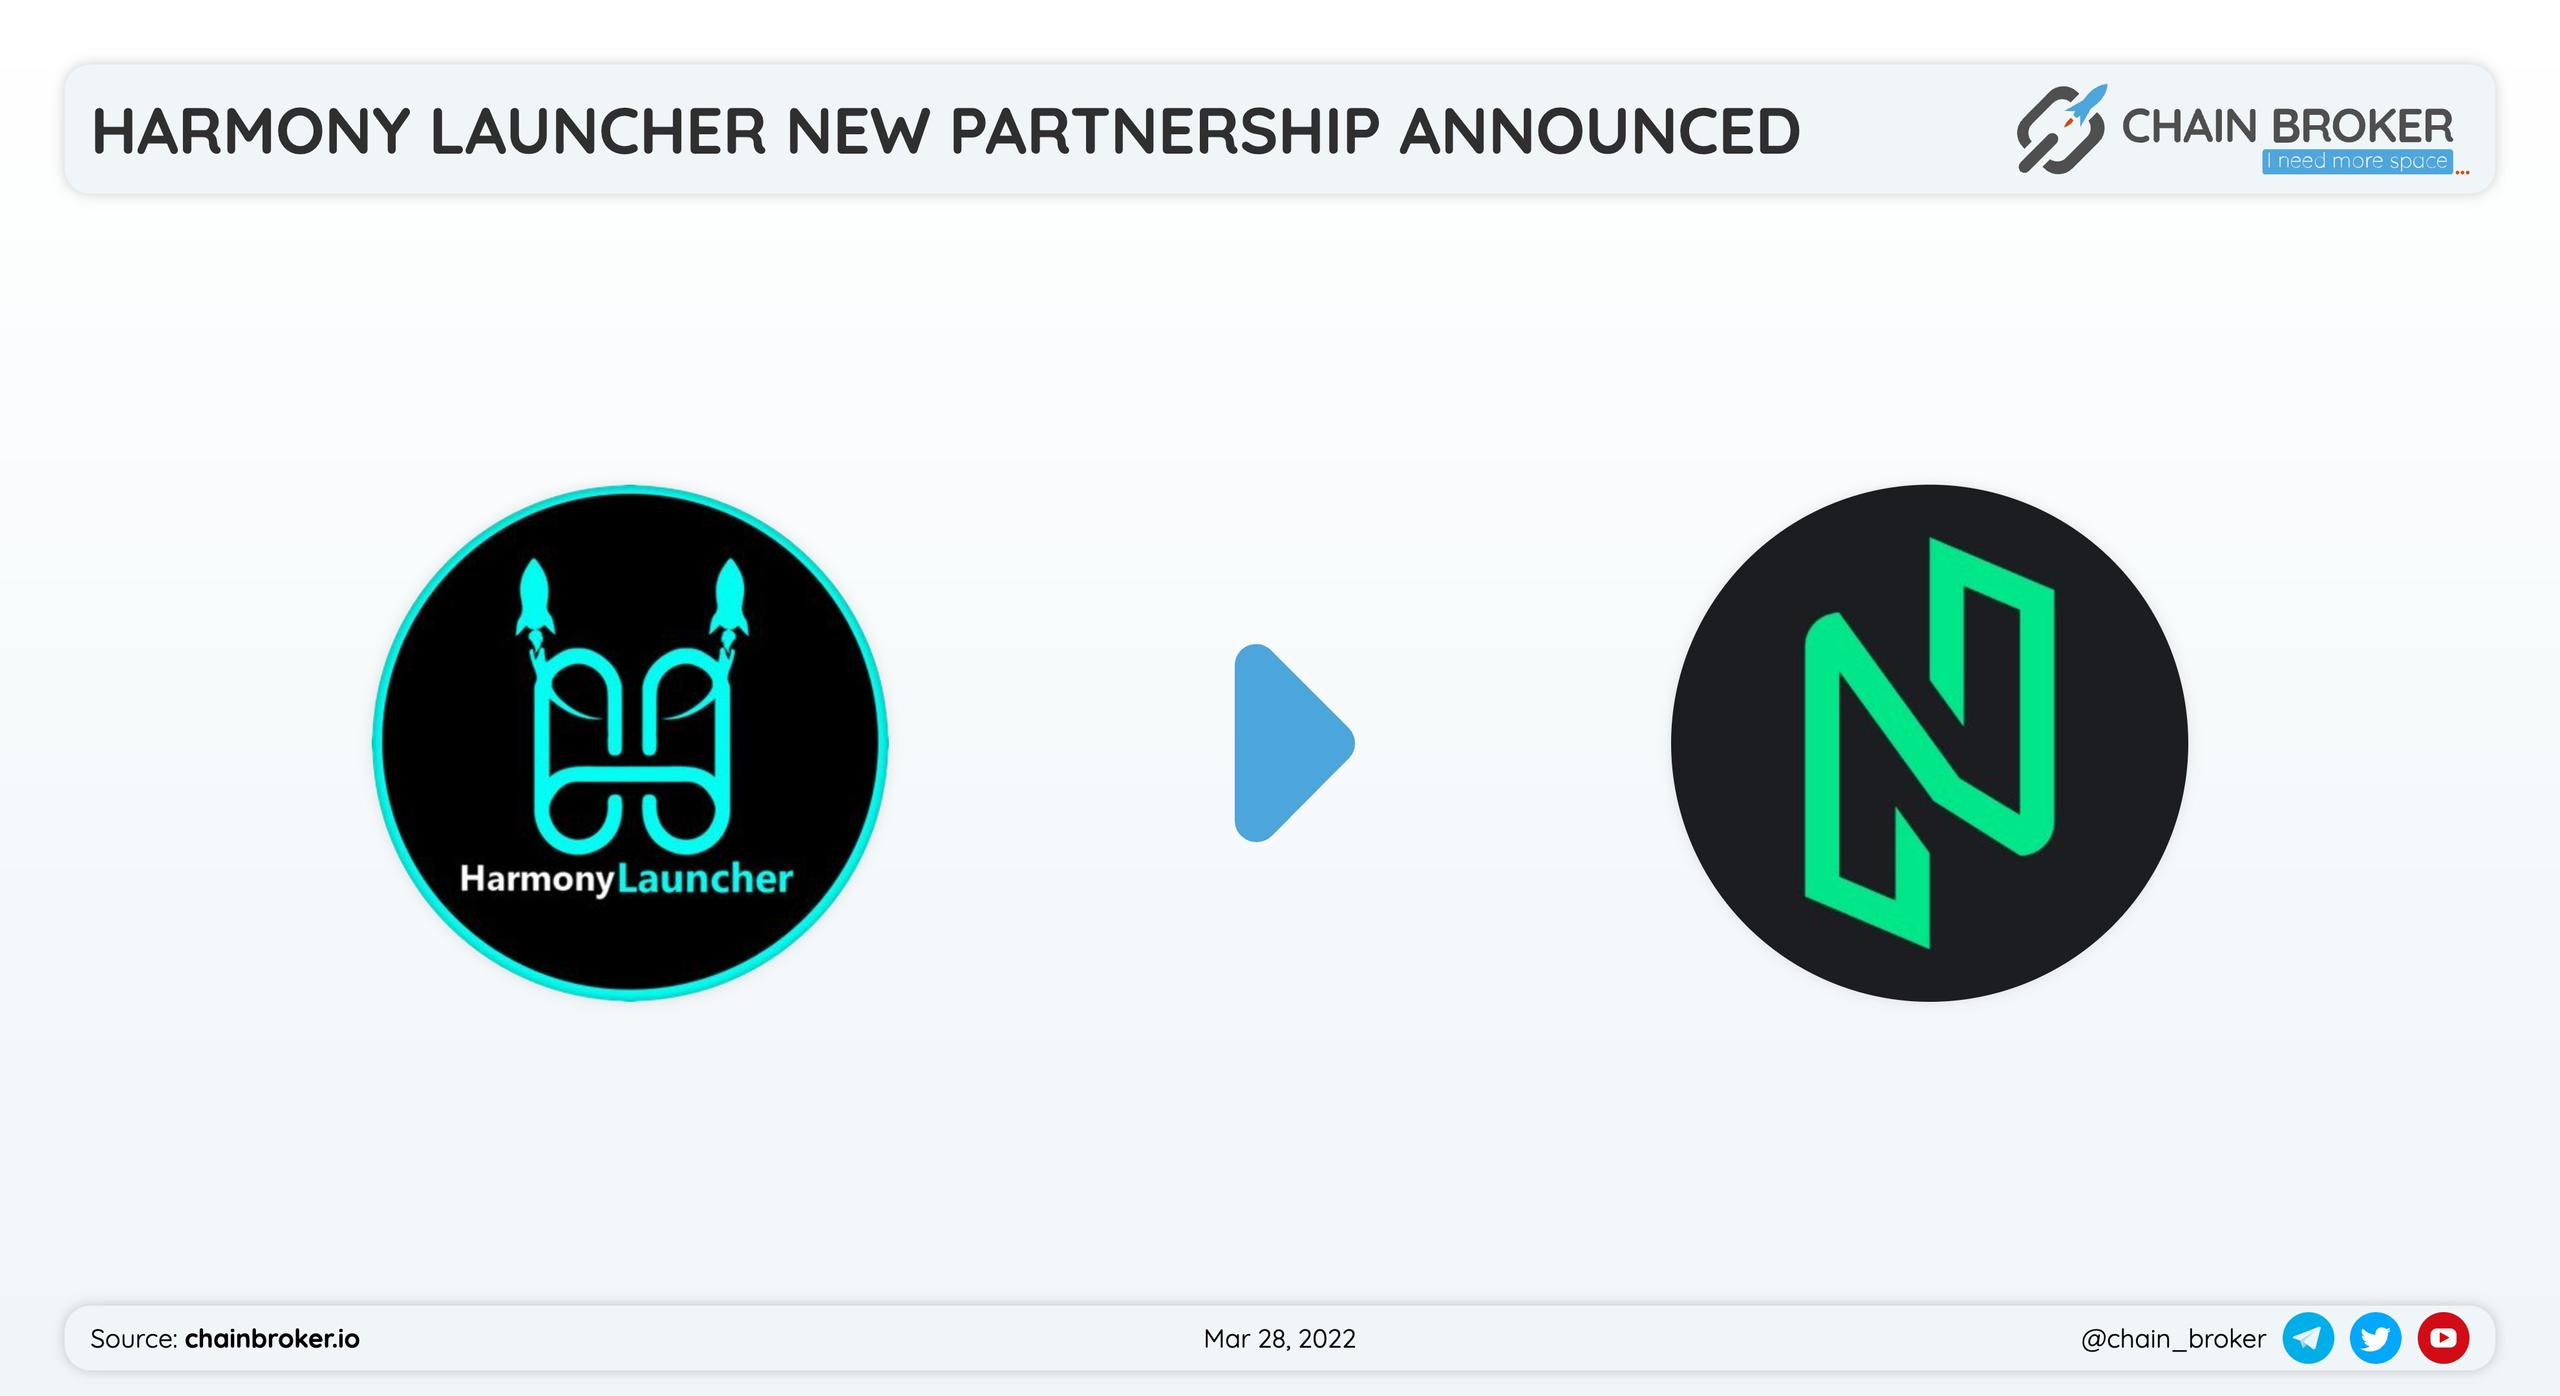 Harmony Launcher has partnered with Nuls to increase project's visibility.